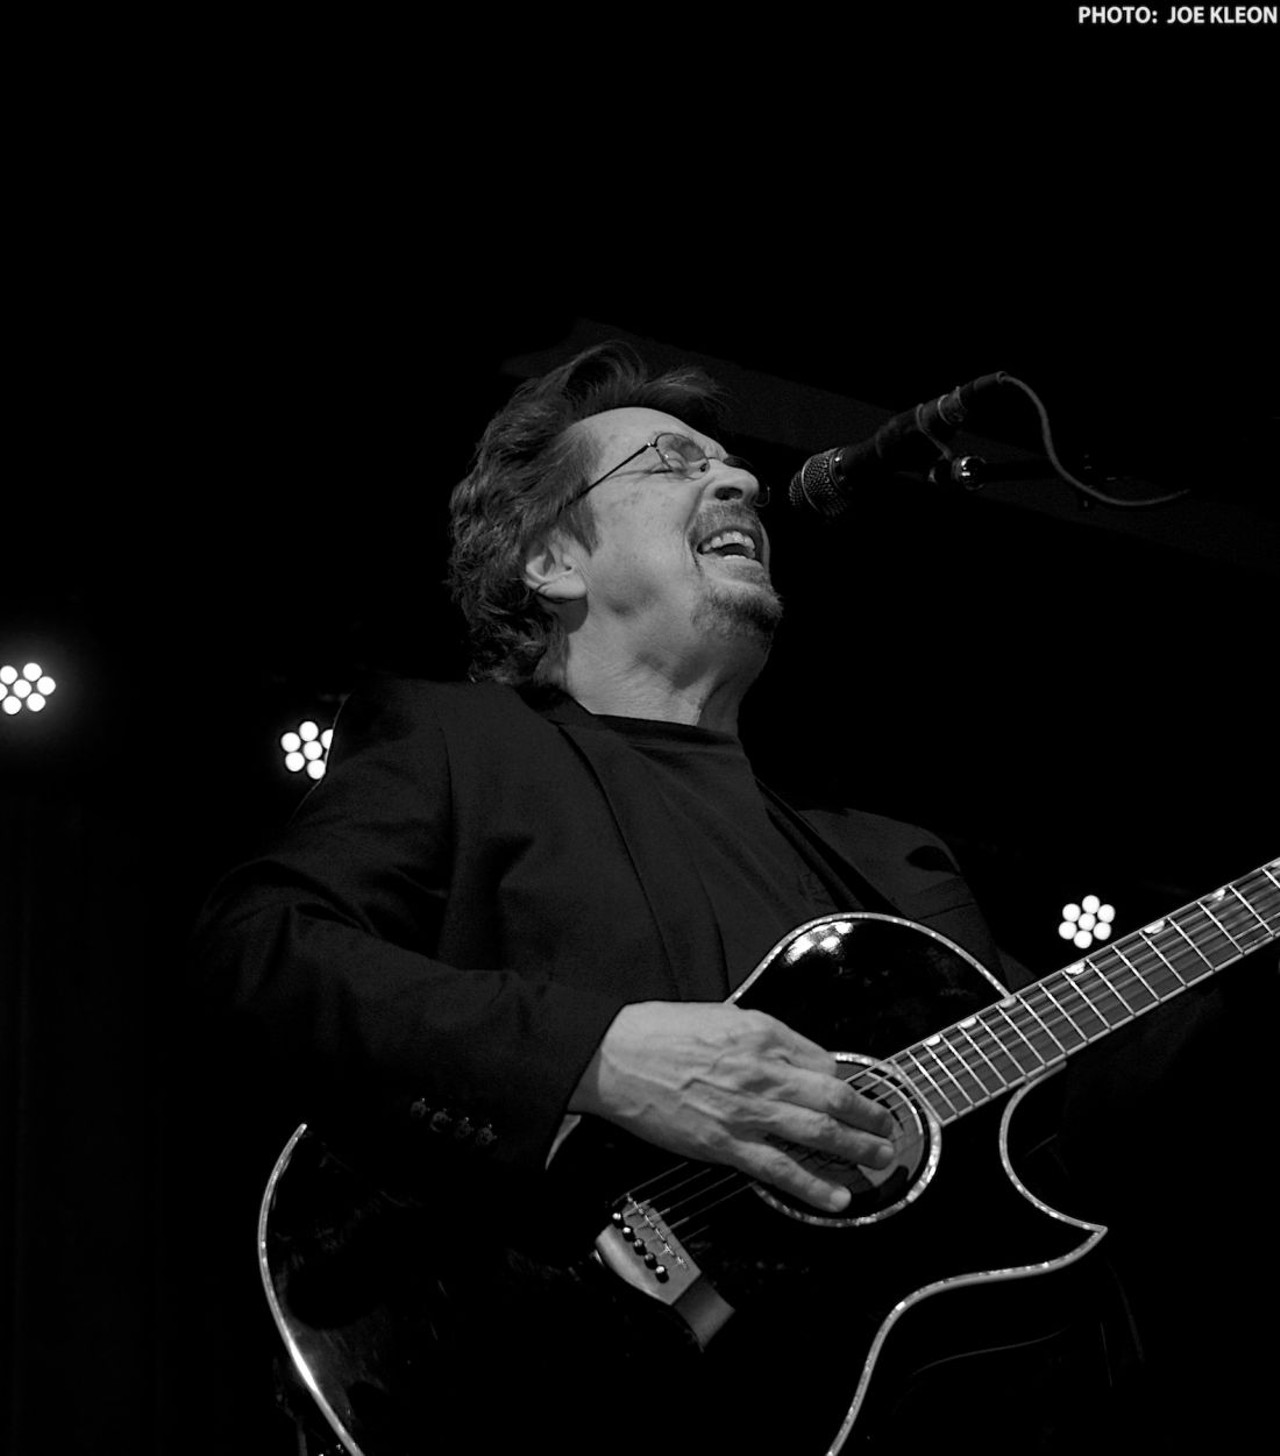 Michael Stanley & Friends and Hey Mavis Performing at the Kent Stage